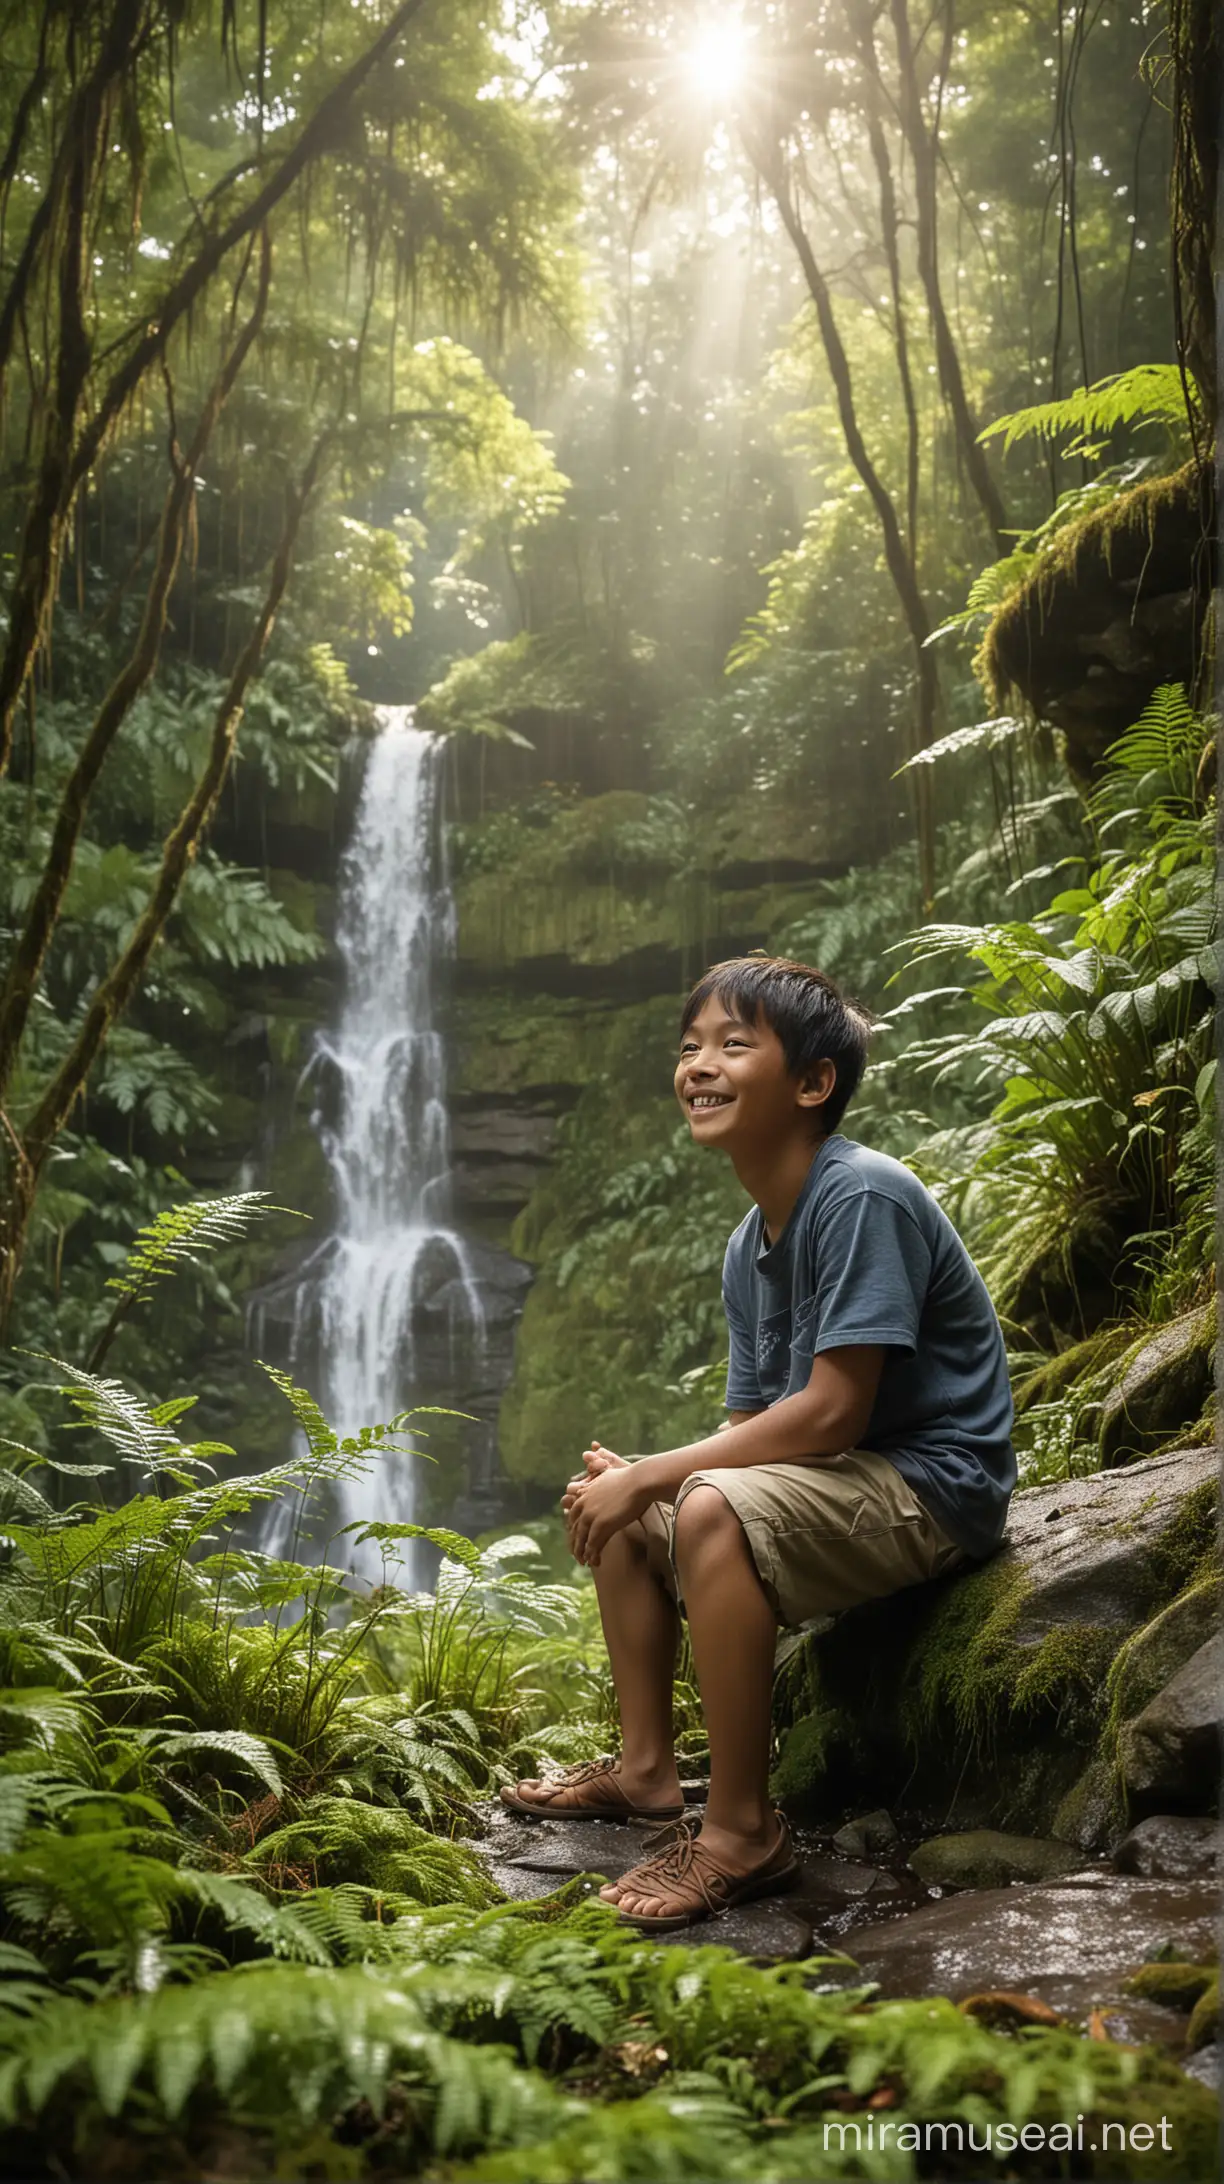 A 25 year old Indonesian young man sits with a 3 year old boy on a rock facing the front camera while smiling in the middle of a forest filled with sunlight, the sun's rays filtering through the leaves. Delicate dewdrops cling to ferns and wildflowers. In the background, a mystical waterfall cascades down moss-covered rocks, and mist rises into the air. High resolution, high realism.